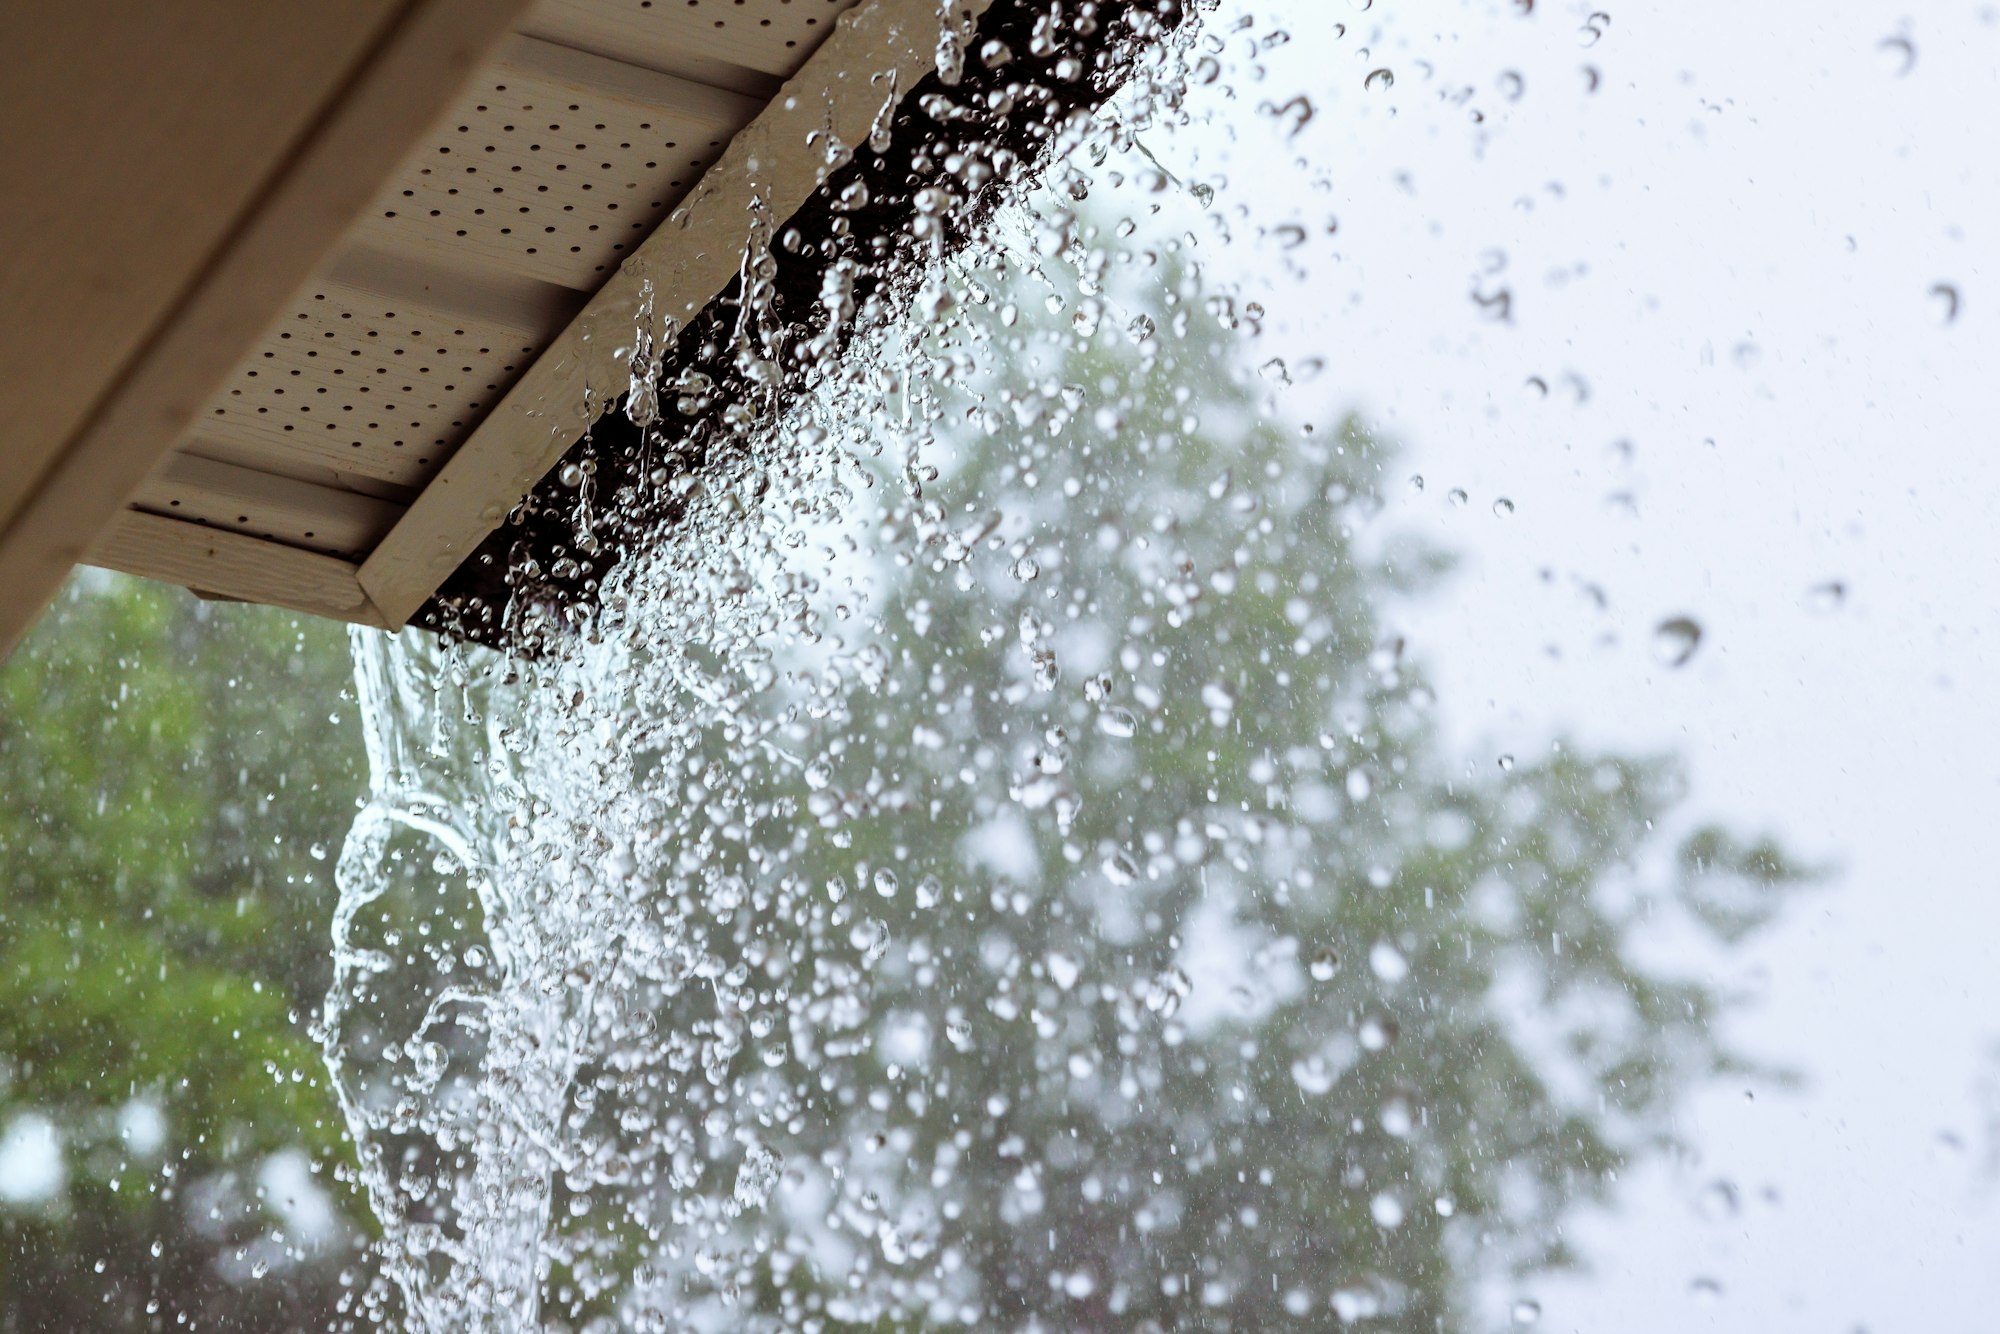 During a downpour, water escapes from the over gutters.